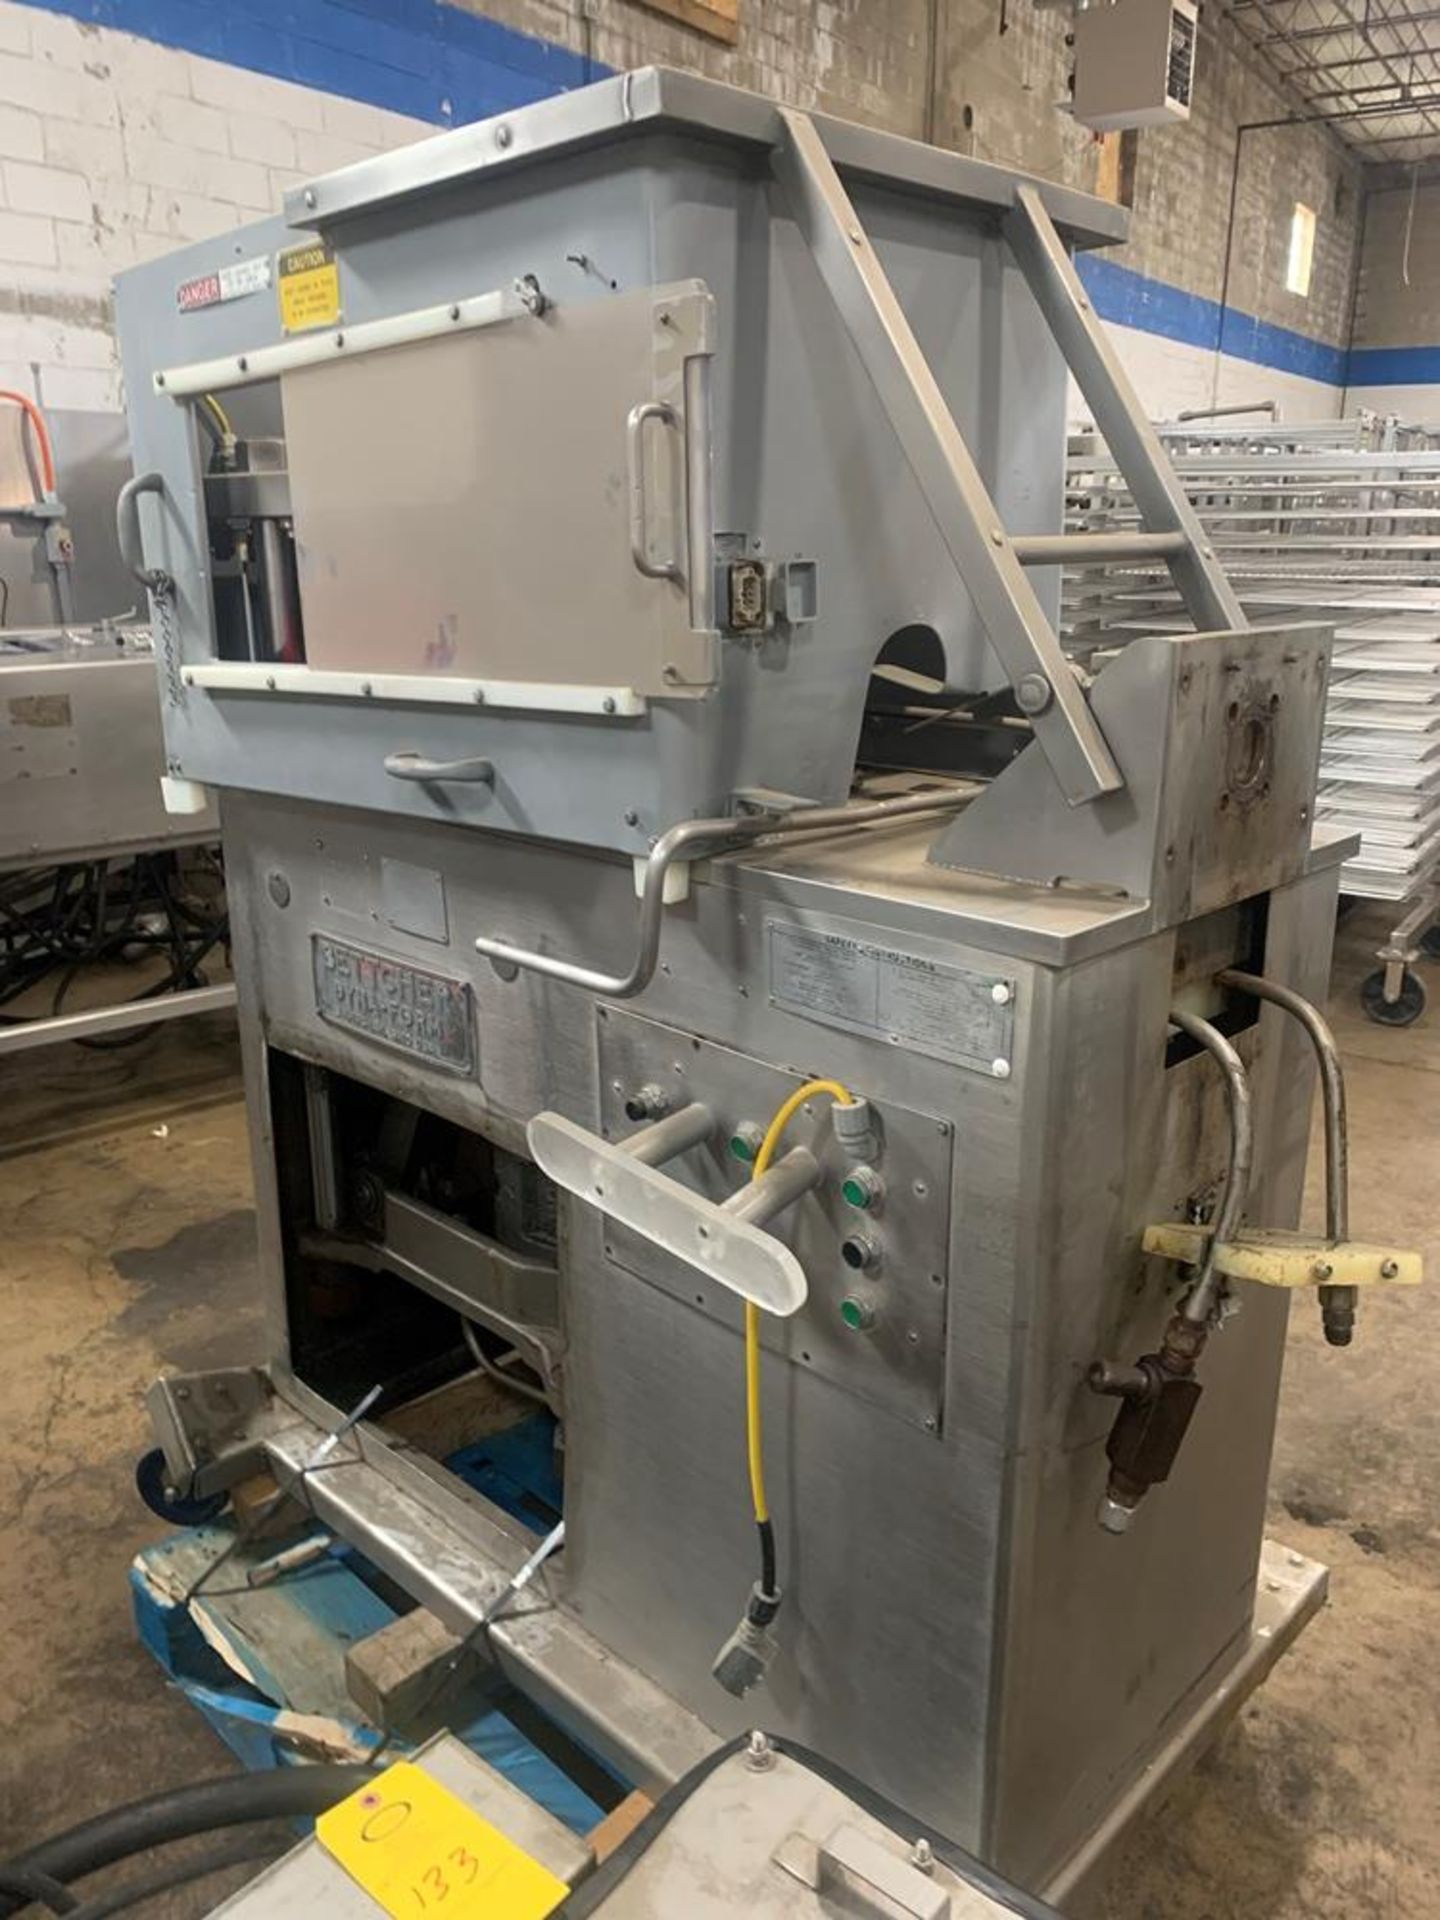 Bettcher Mdl. 75 Press with power pack for parts (Located in Plano, IL)